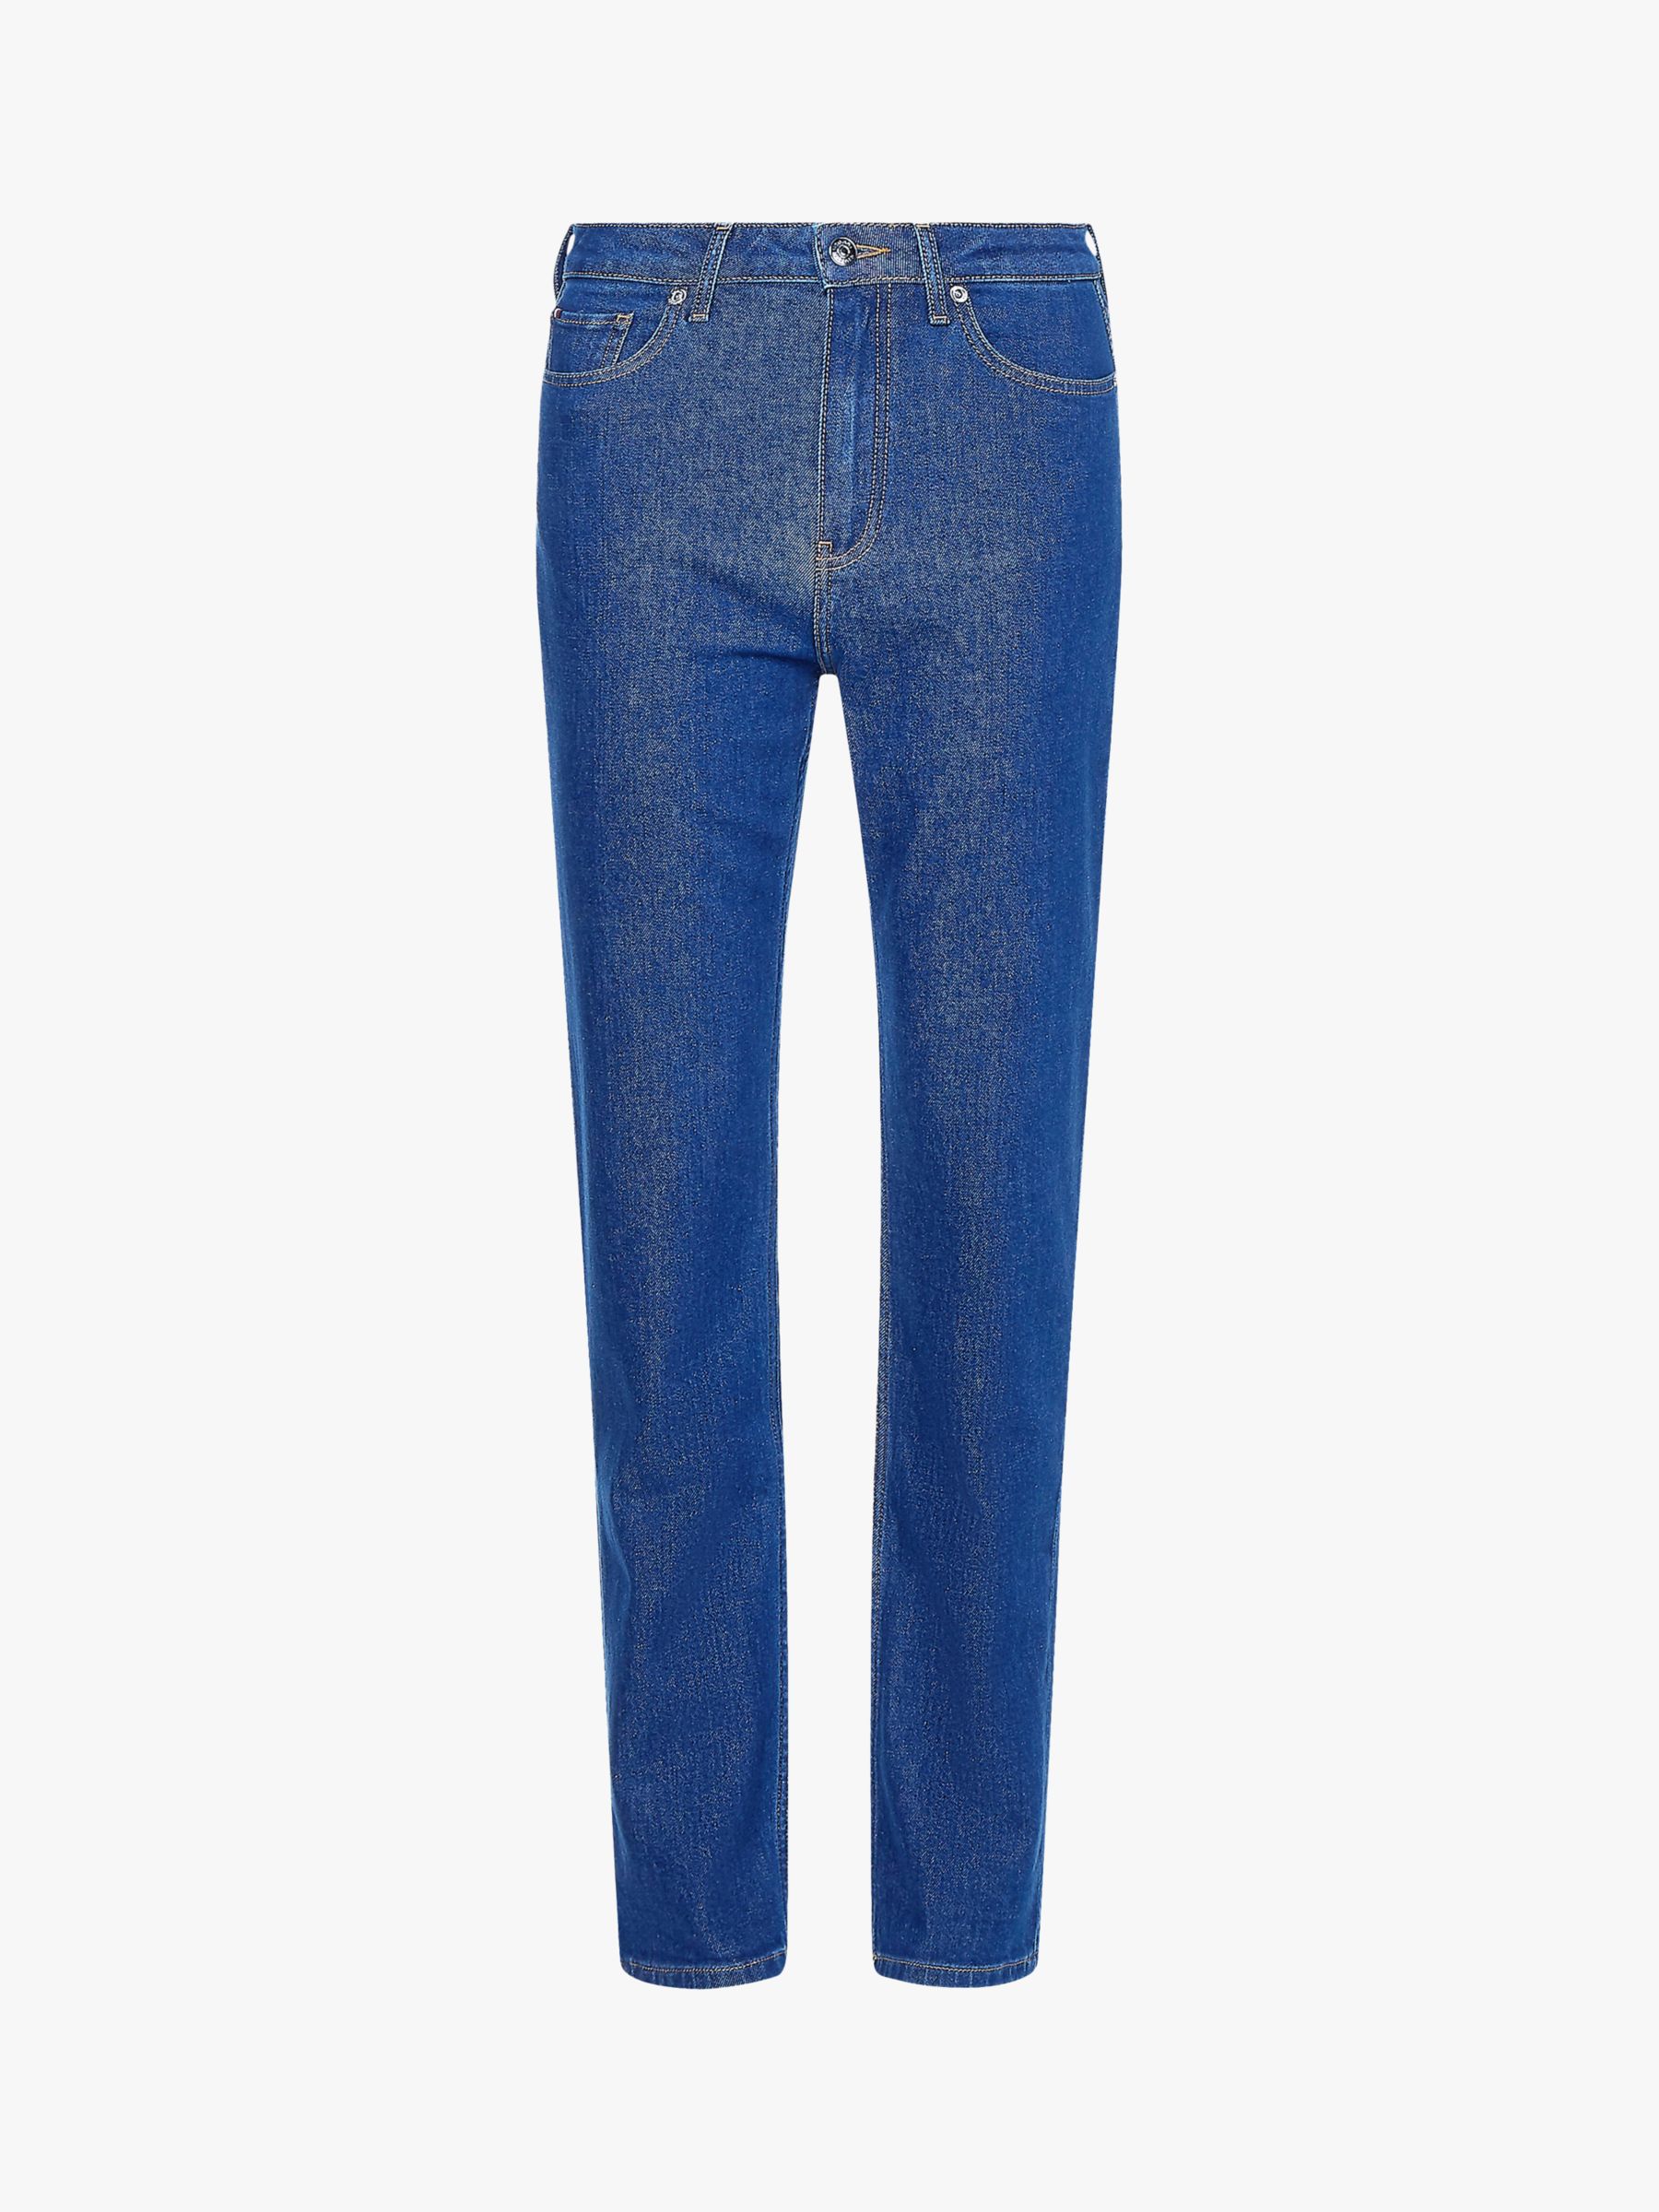 Buy Tommy Hilfiger High Rise Straight Leg Jeans, Tia Online at johnlewis.com